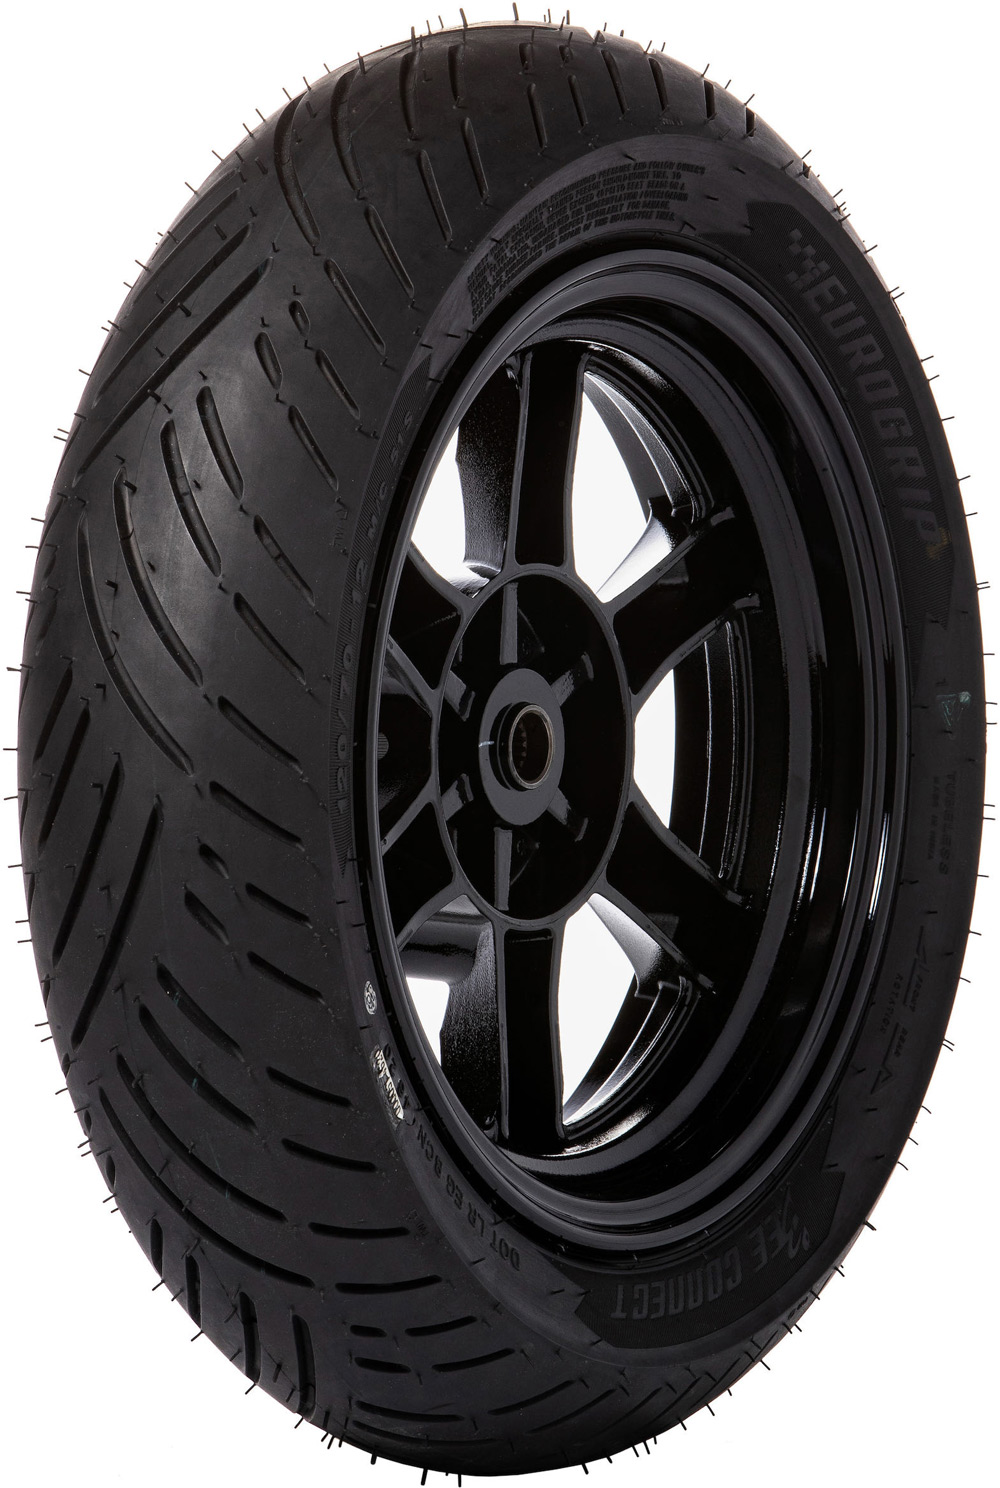 EUROGRIP BEECONNECT TL 110/90 R13 56P